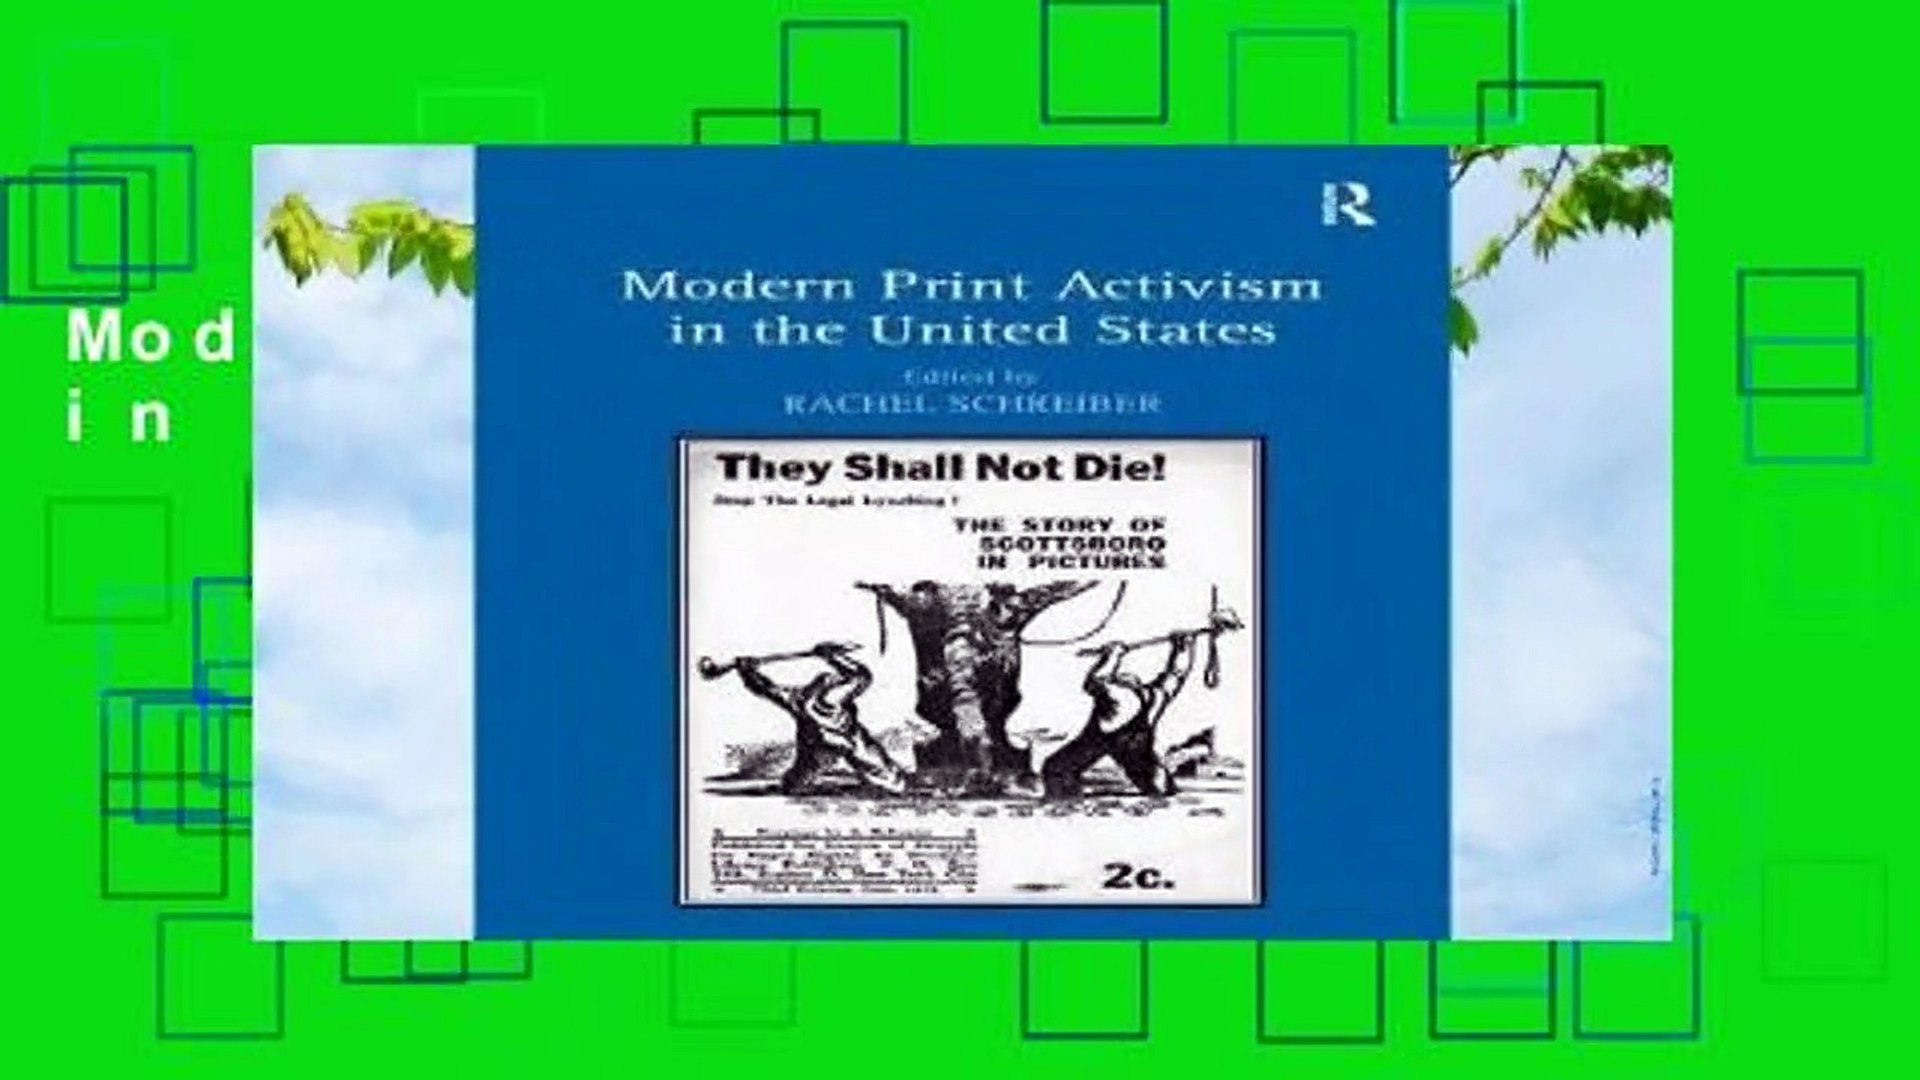 Modern Print Activism in the United States